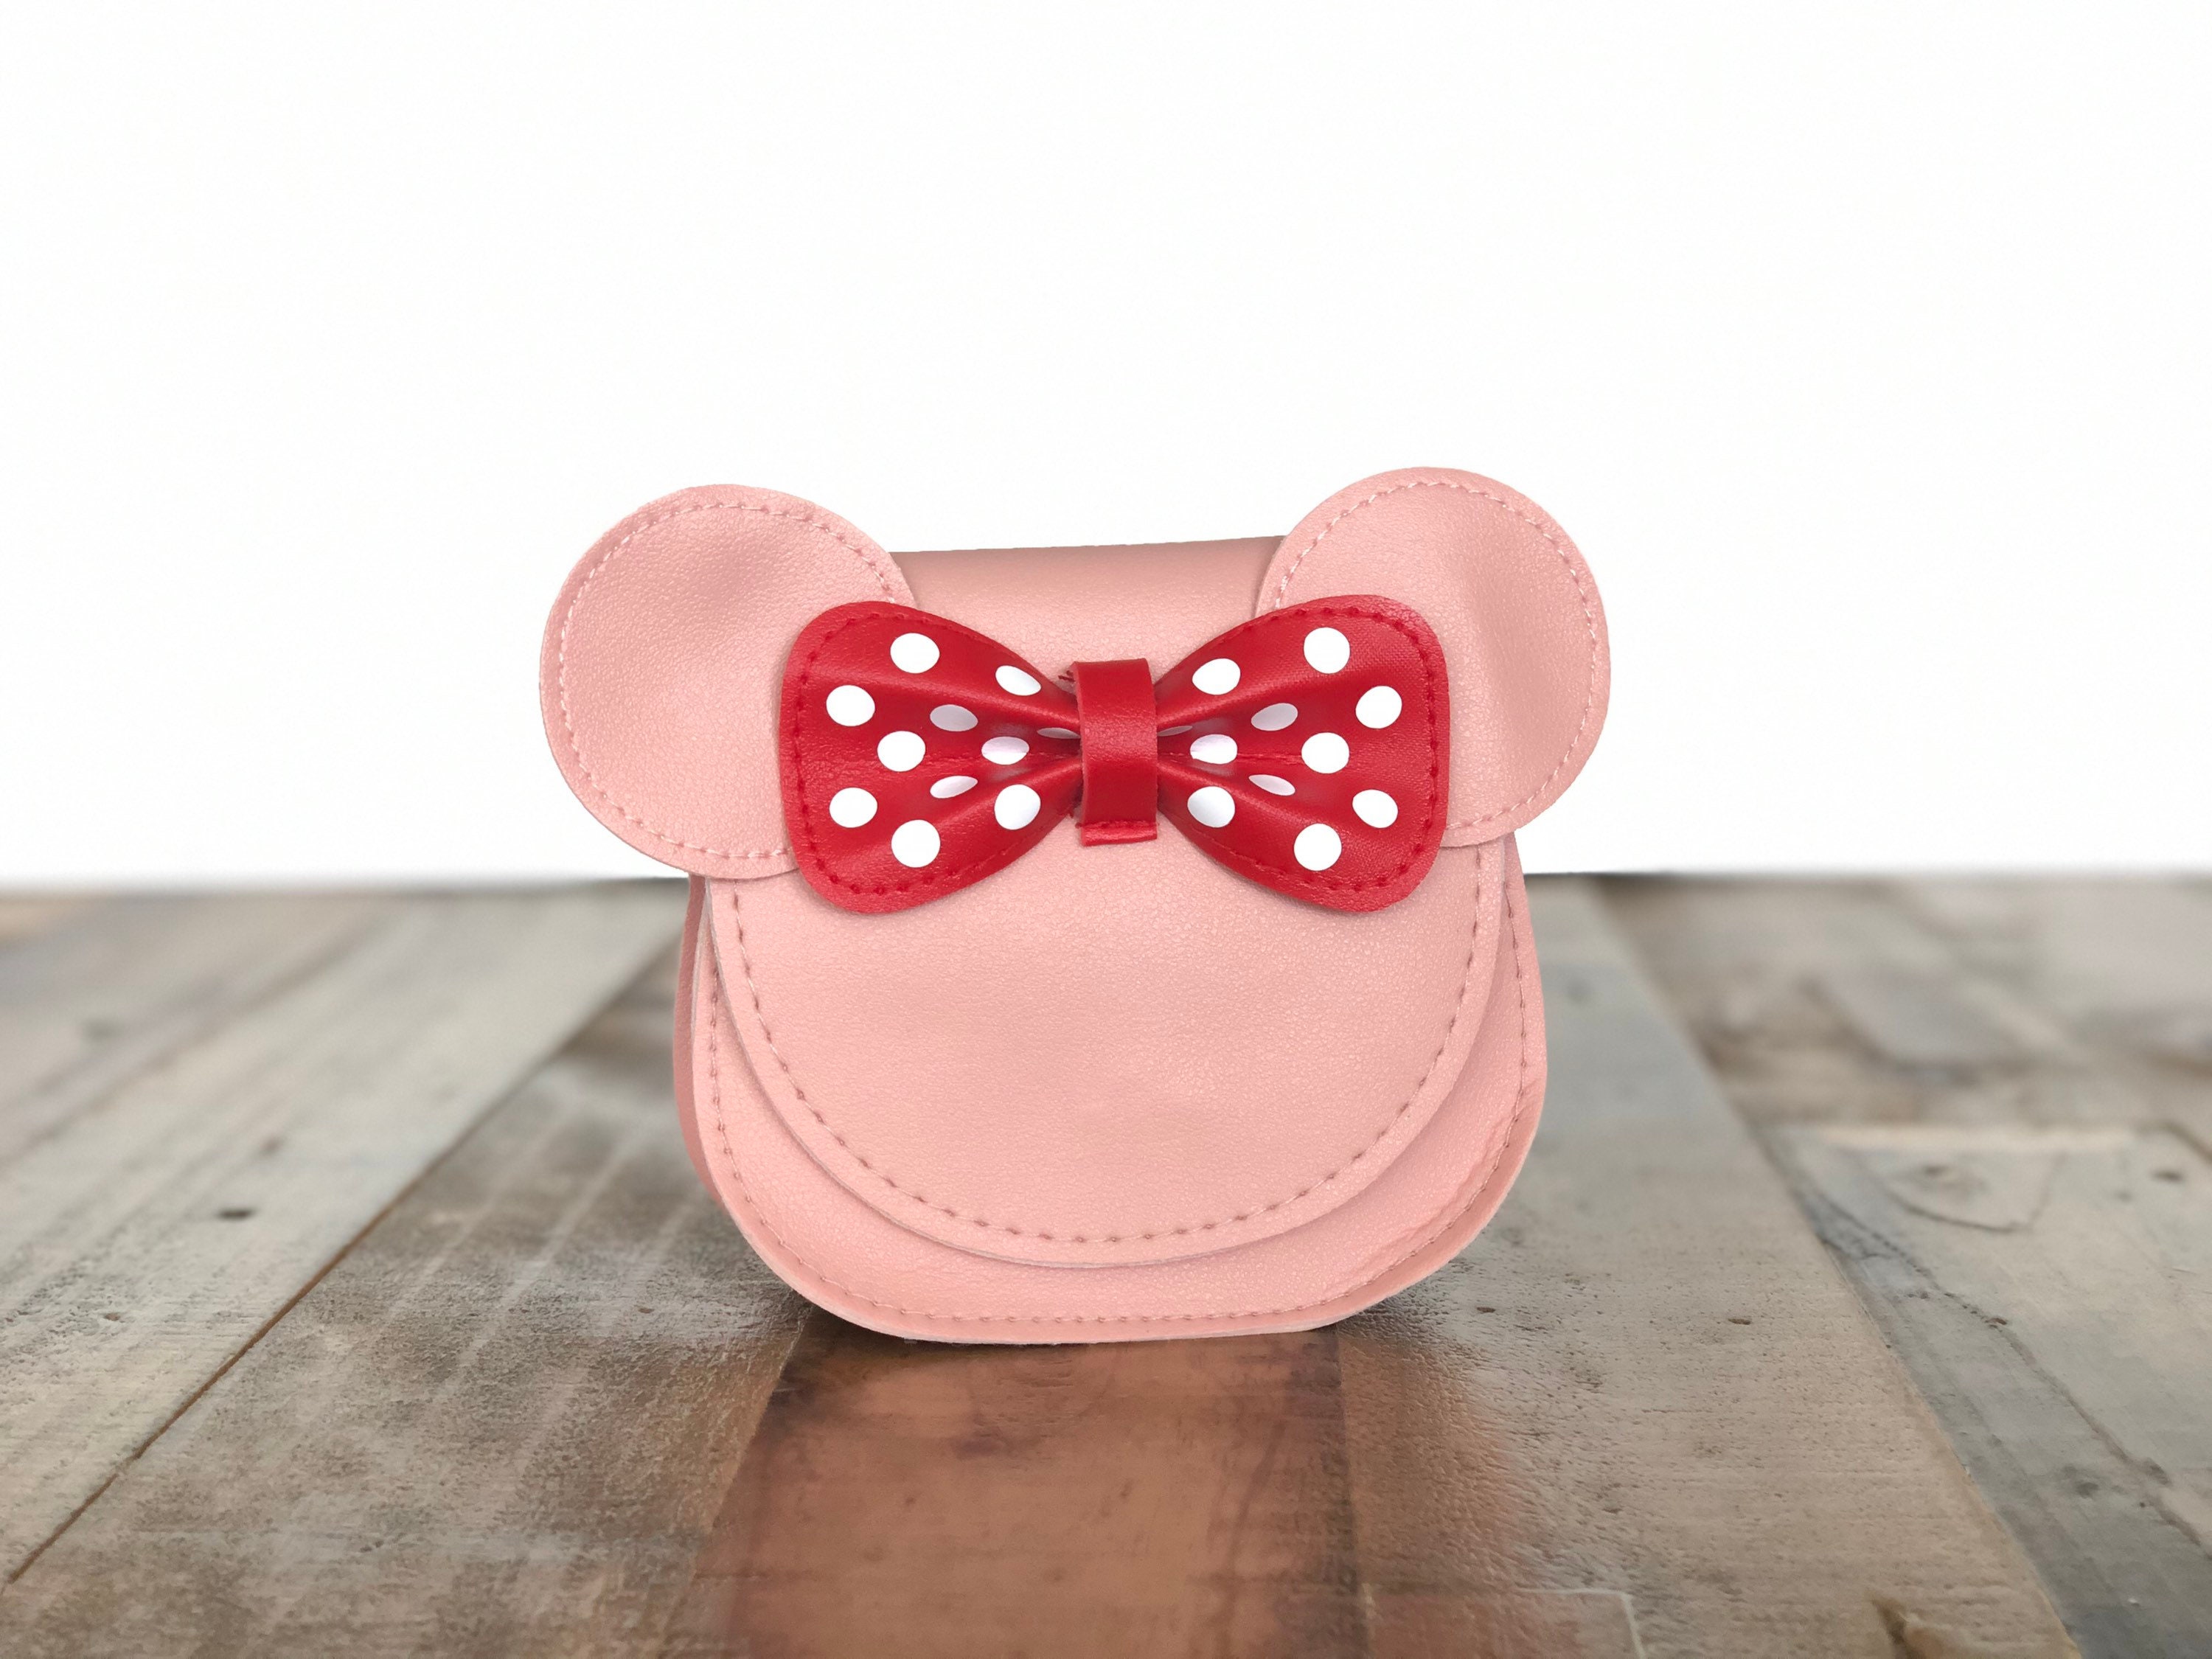 CYSJ Children's 3D Minnie Mickey Mouse India | Ubuy